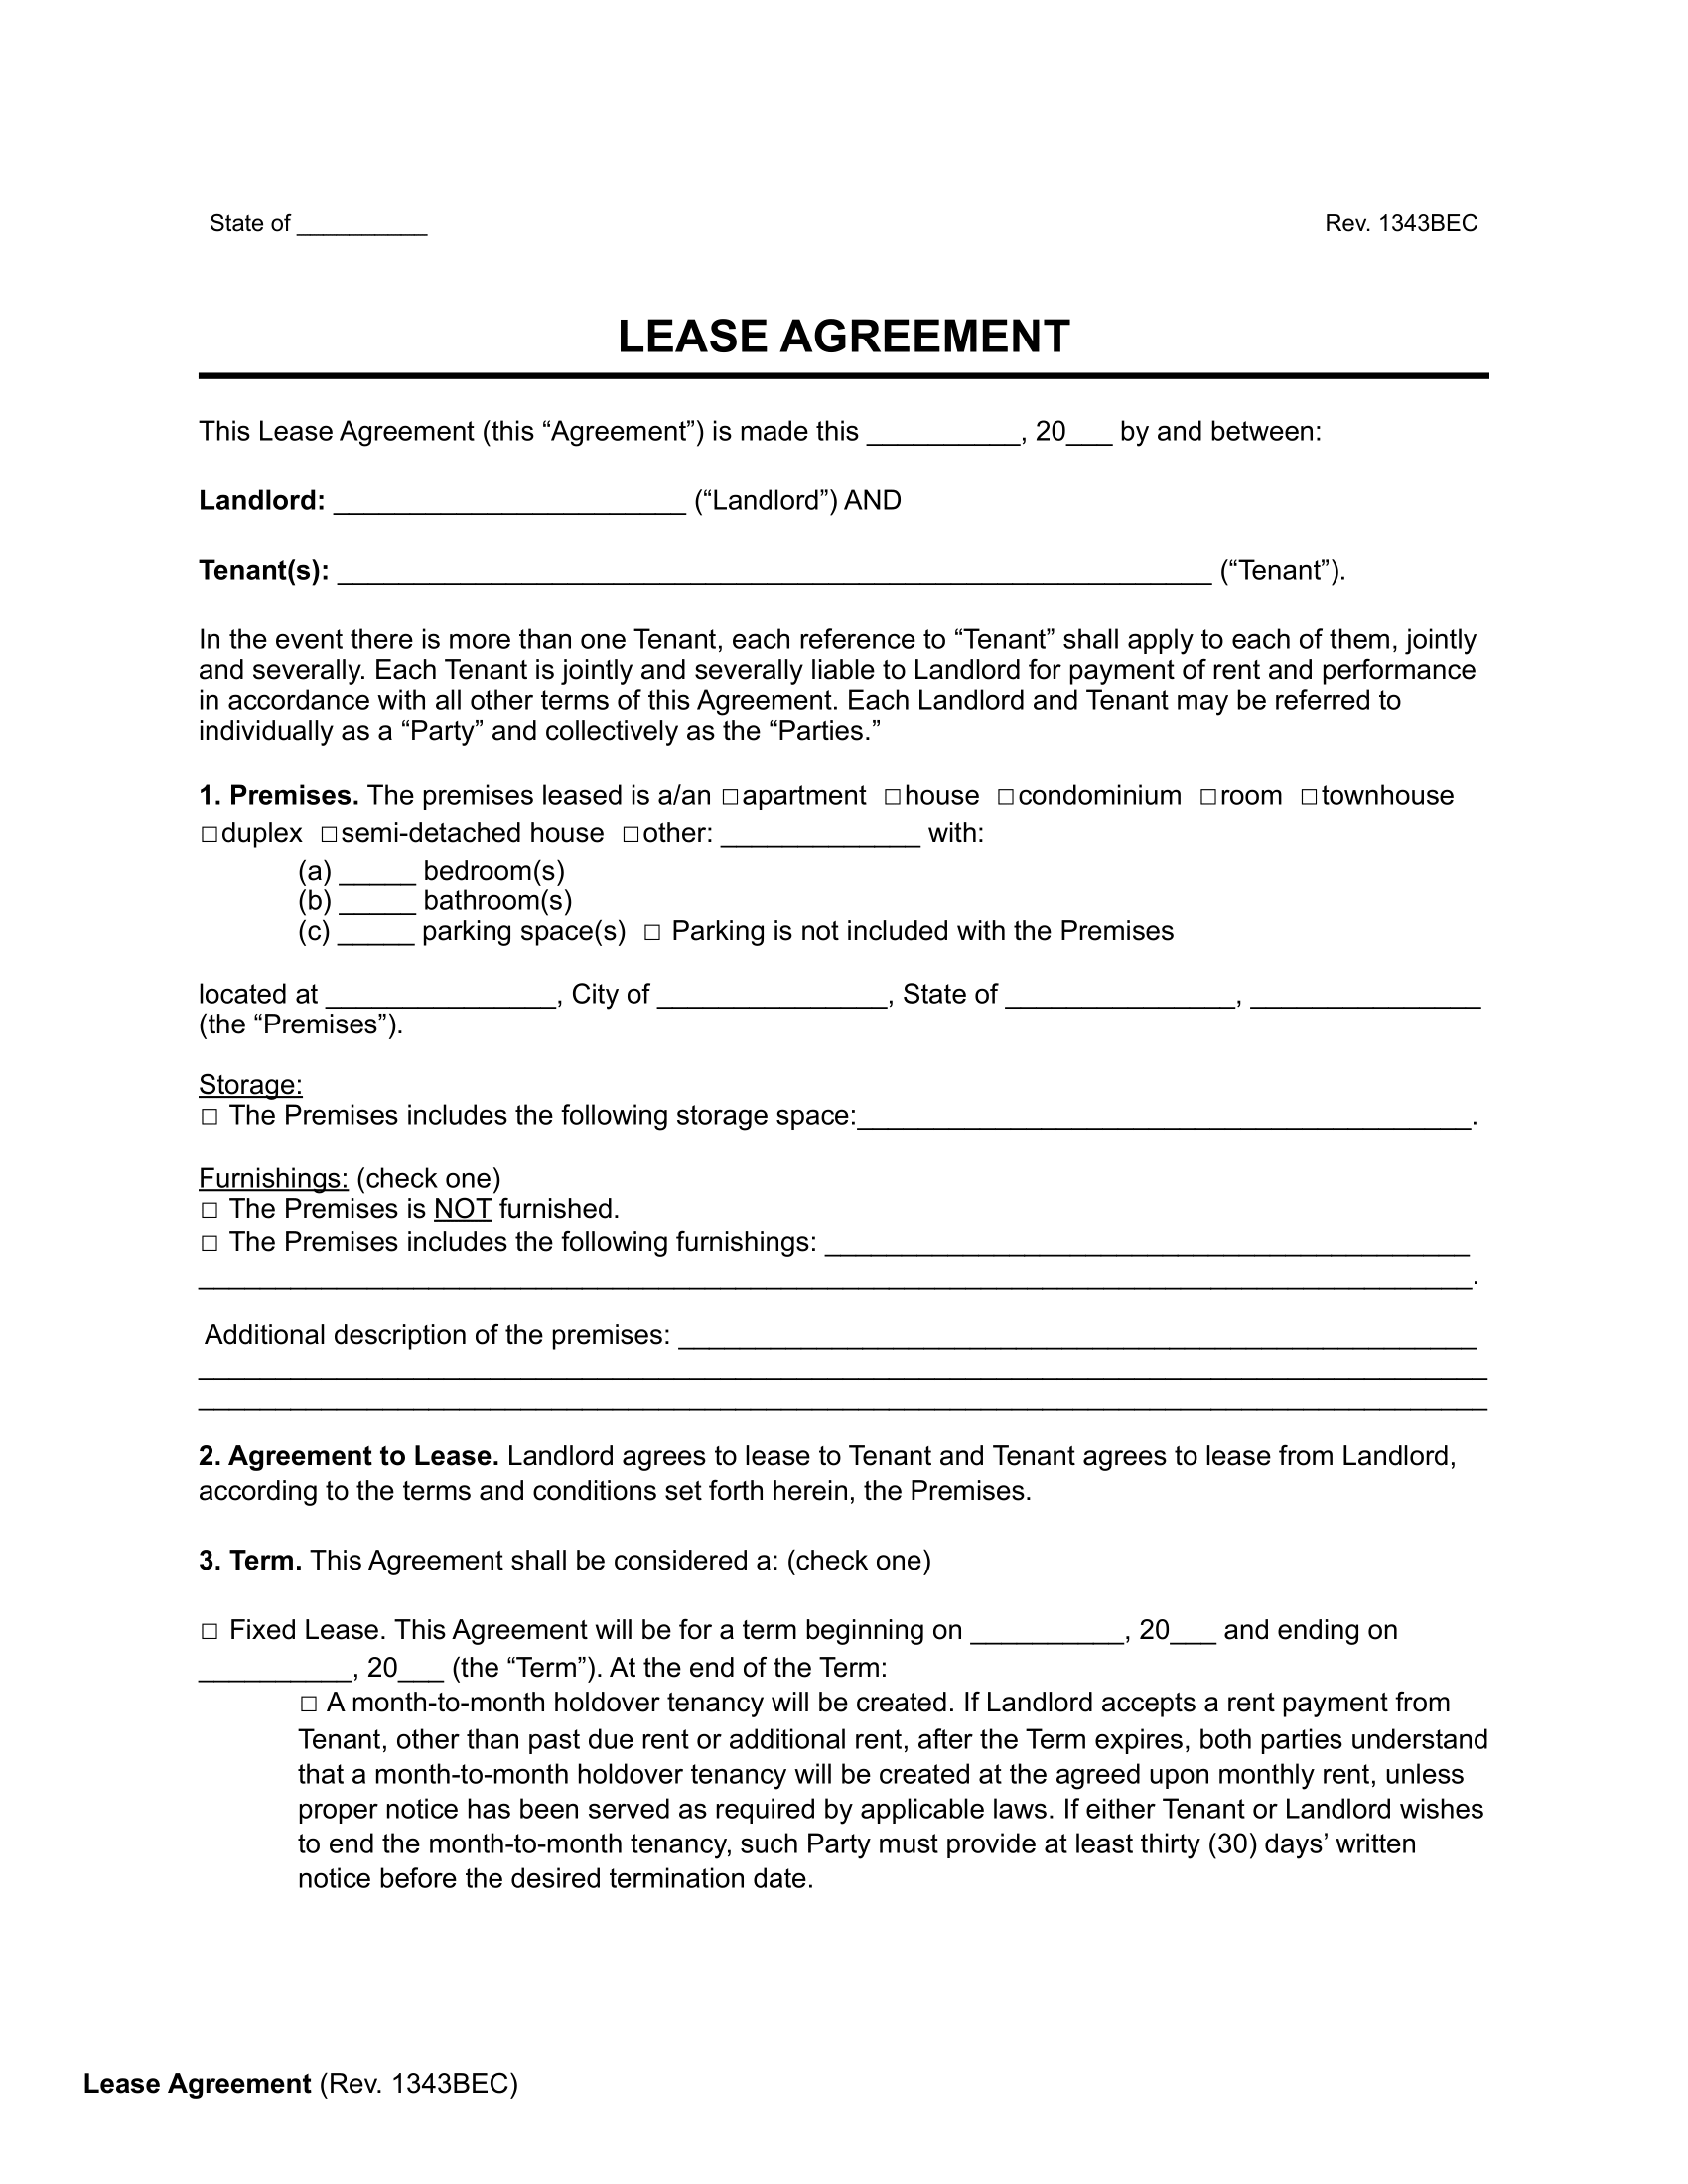 residential lease agreement template